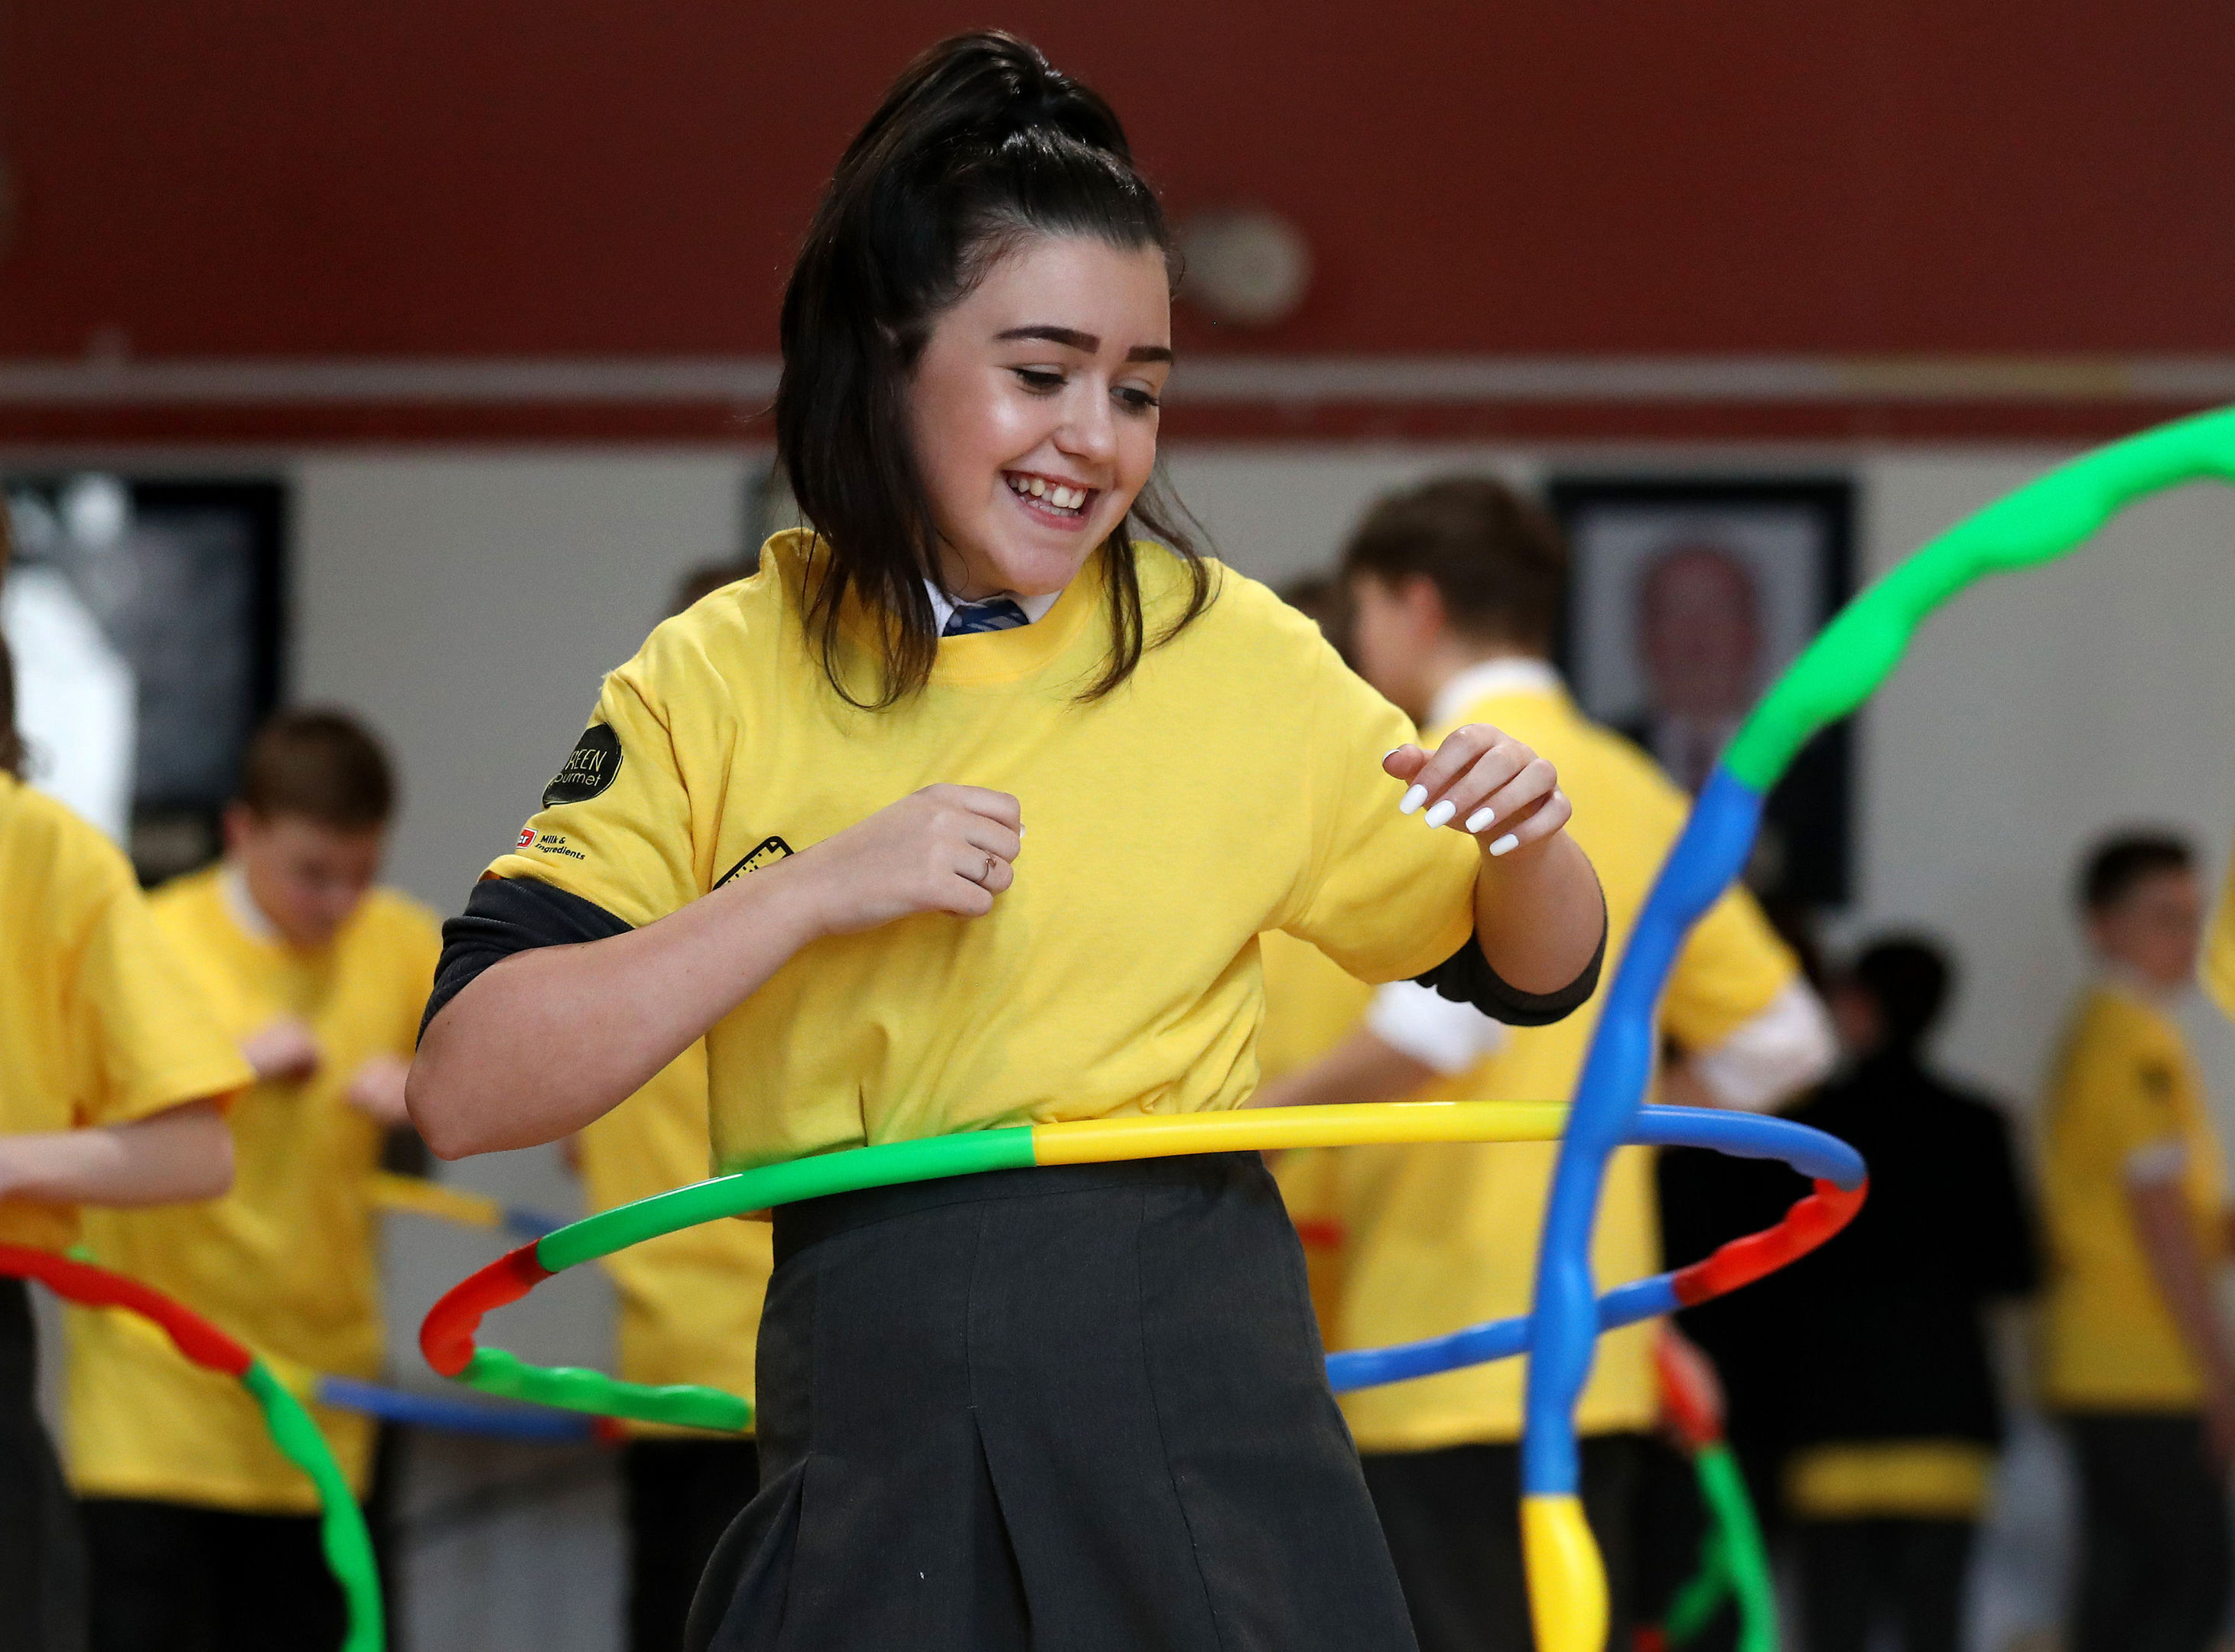 Bryonney Wilson-Gray joins her classmates in hula hoop exercise at  Holyrood Secondary School in Glasgow (Andrew Milligan/PA Wire)